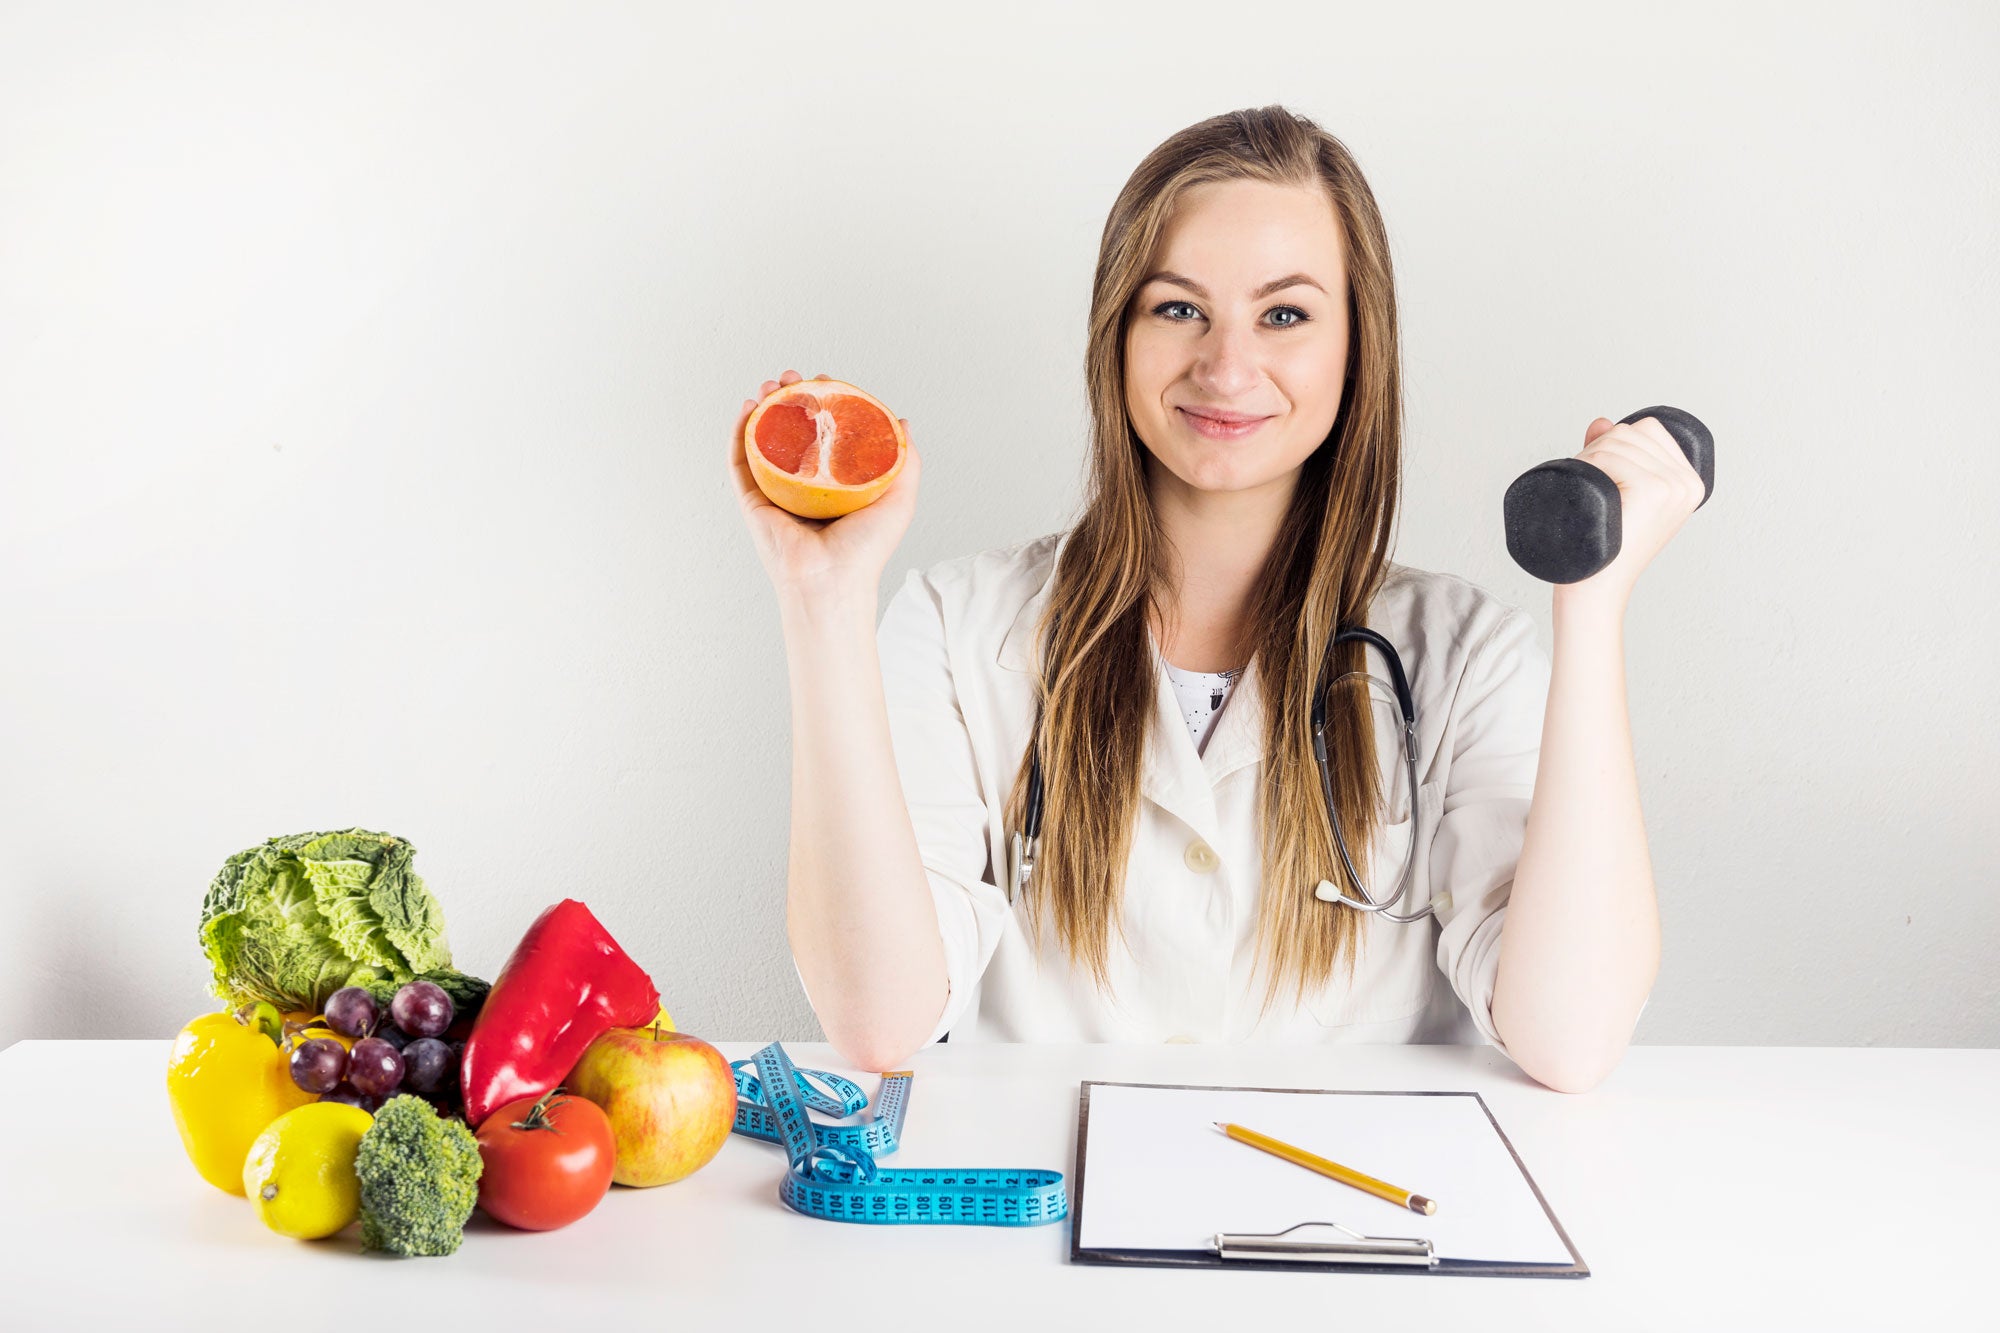 Image of a woman holding a grapefruit on her right hand and a dumbbell on her left hand. In front of her is a white table with a bowl full of fruits and vegetables and a clipboard with a paper and pencil.